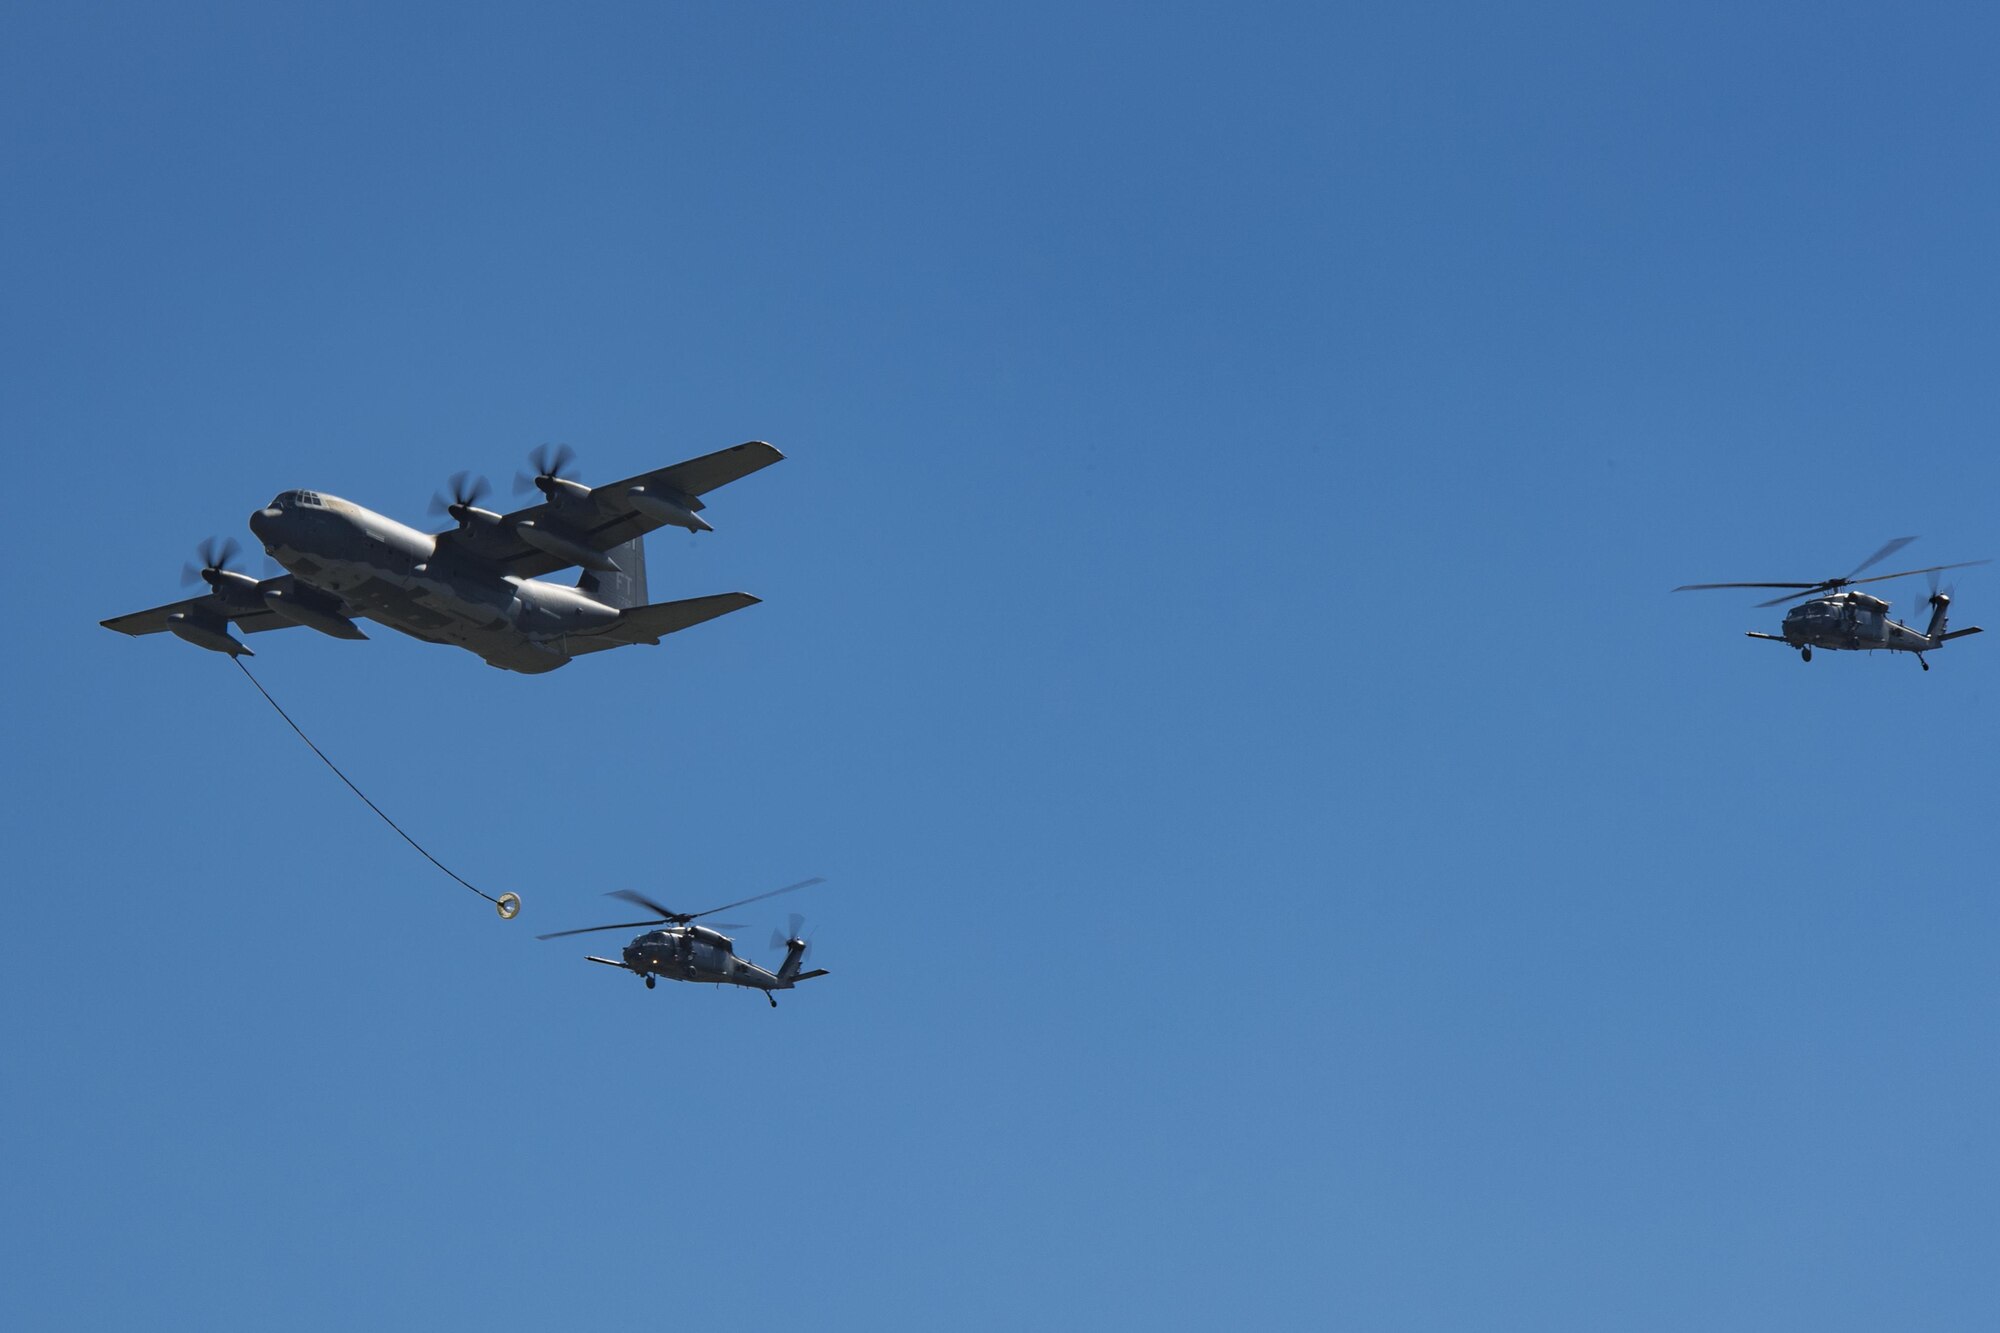 HC-130J Combat King II and two HH-60G Pavehawks demonstrate its capabilities during the Thunder Over South Georgia Air Show, Oct. 29, 2017, at Moody Air Force Base, Ga. The open house included aerial performances, food, face painting and much more. (U.S. Air Force photo by Staff Sgt, Eric Summers Jr.)